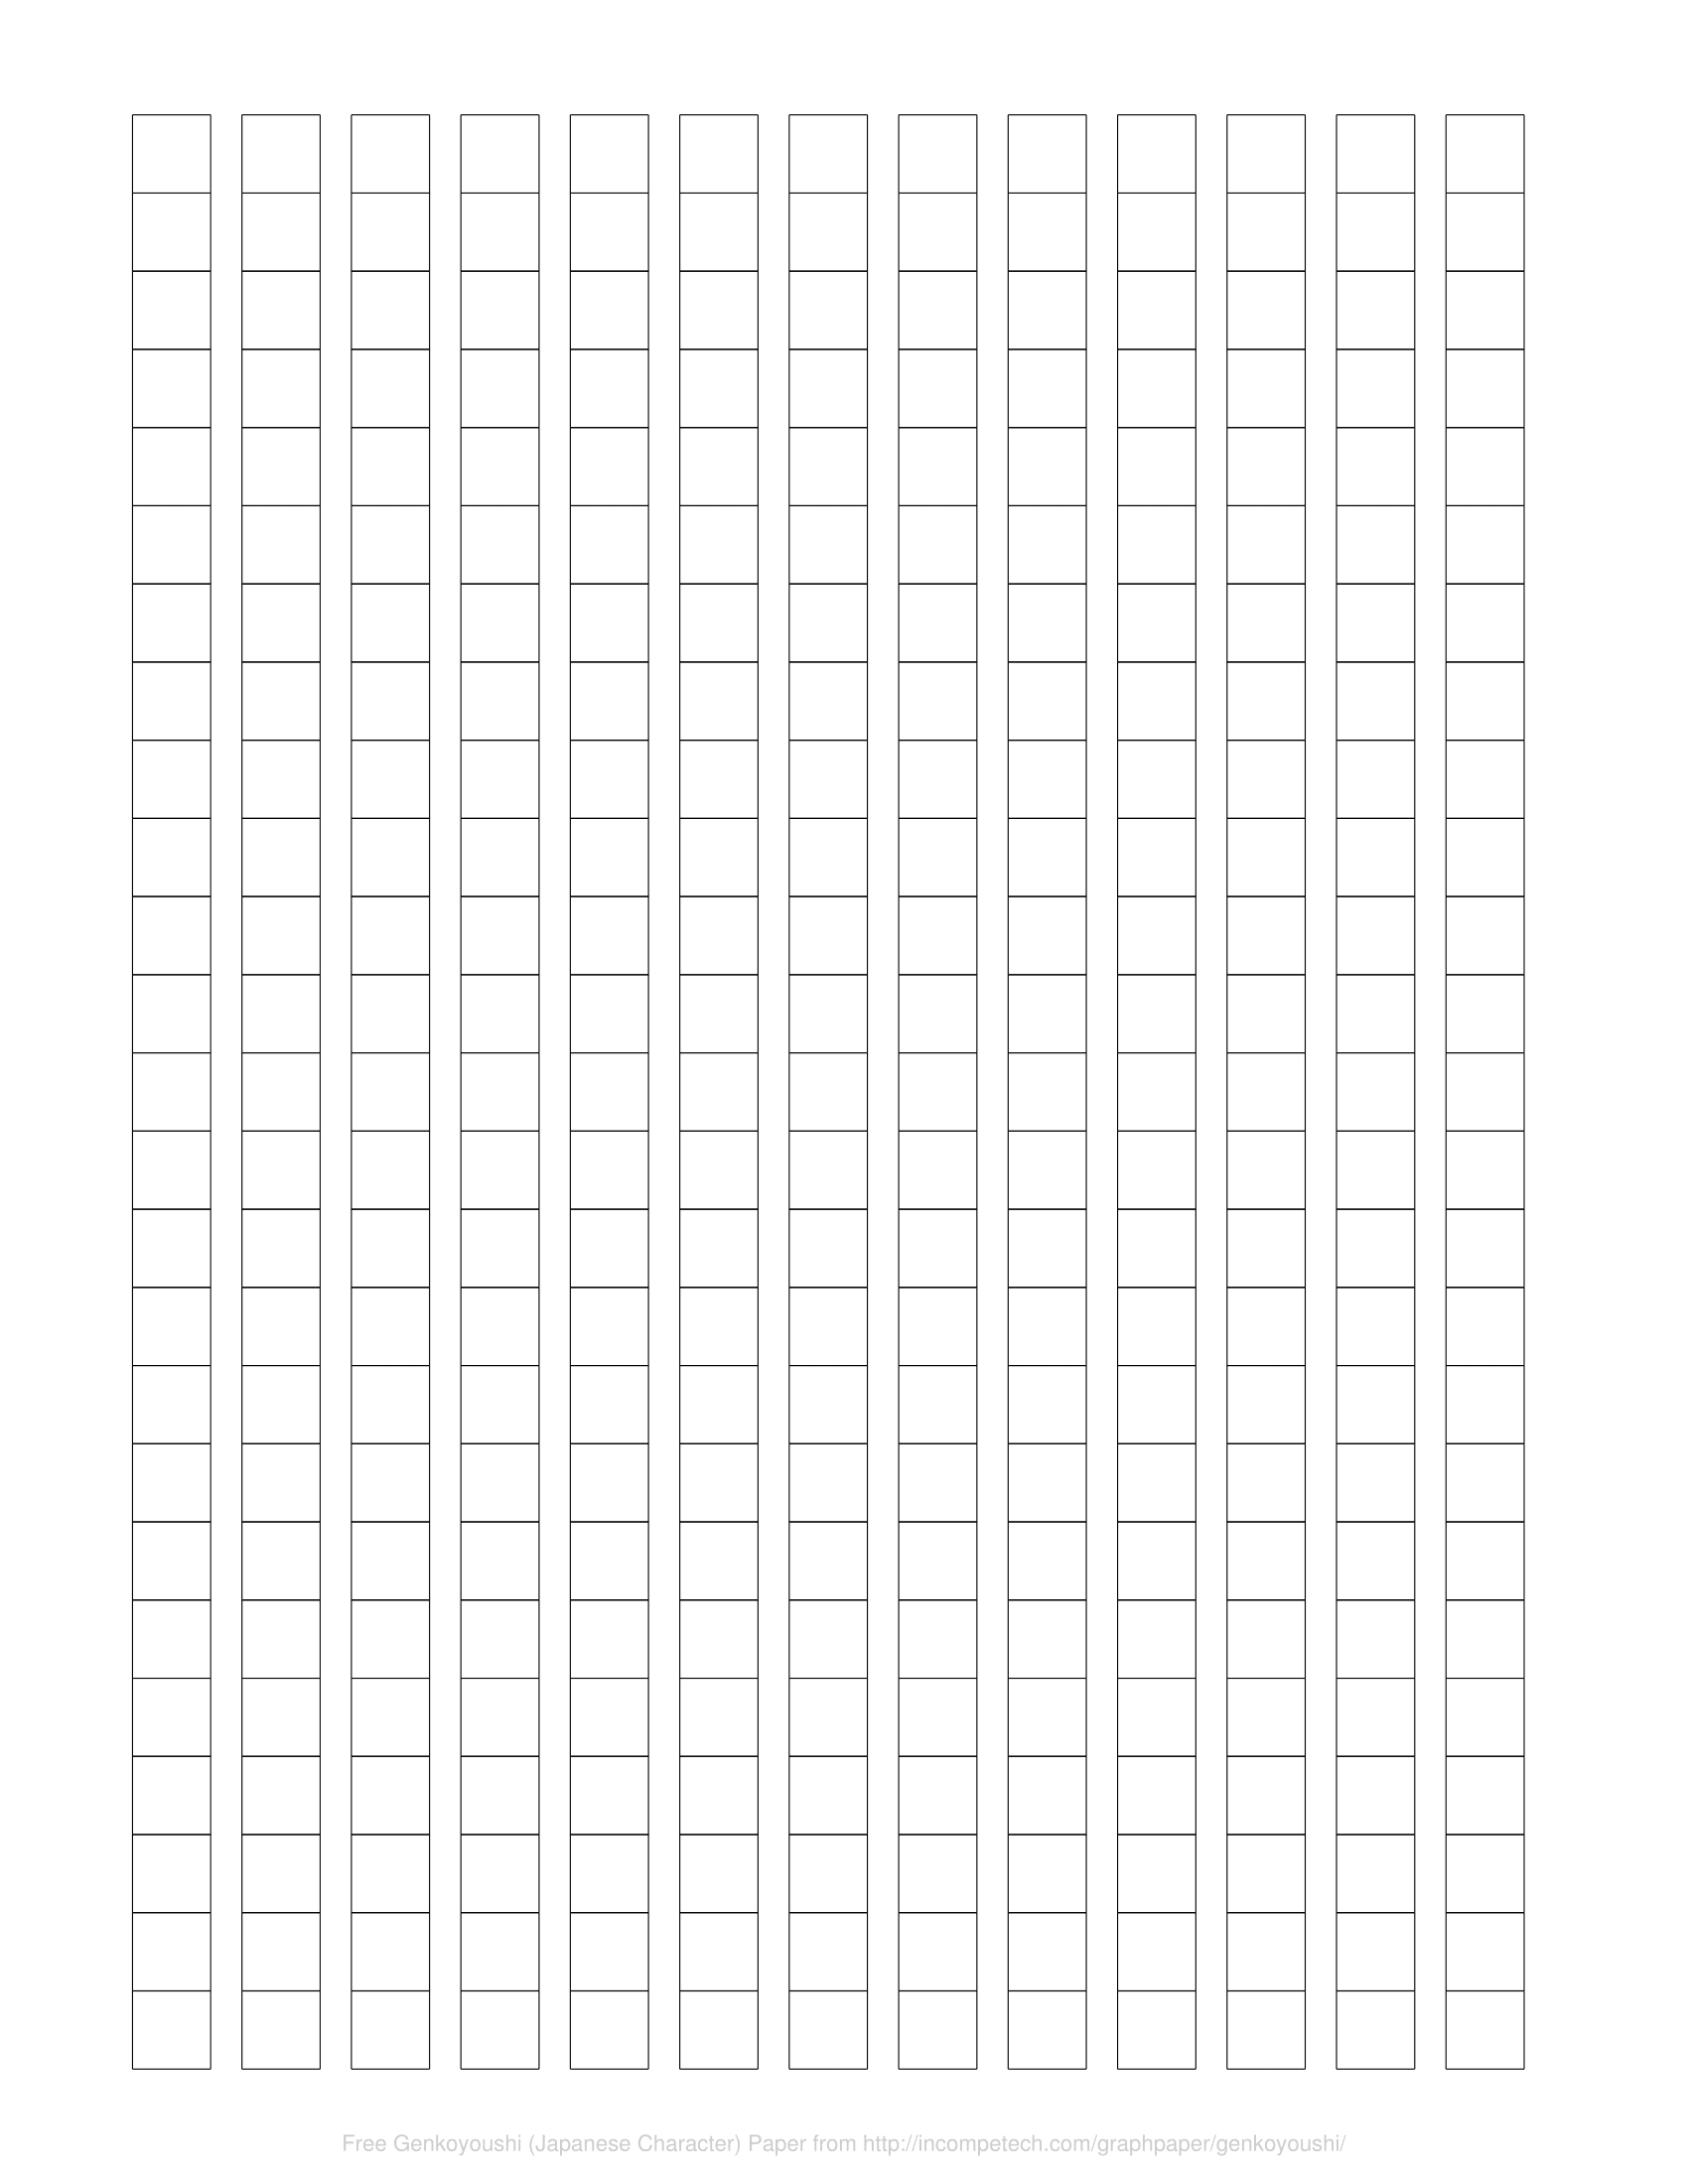 Free Online Graph Paper / Genkoyoushi (Japanese Character)